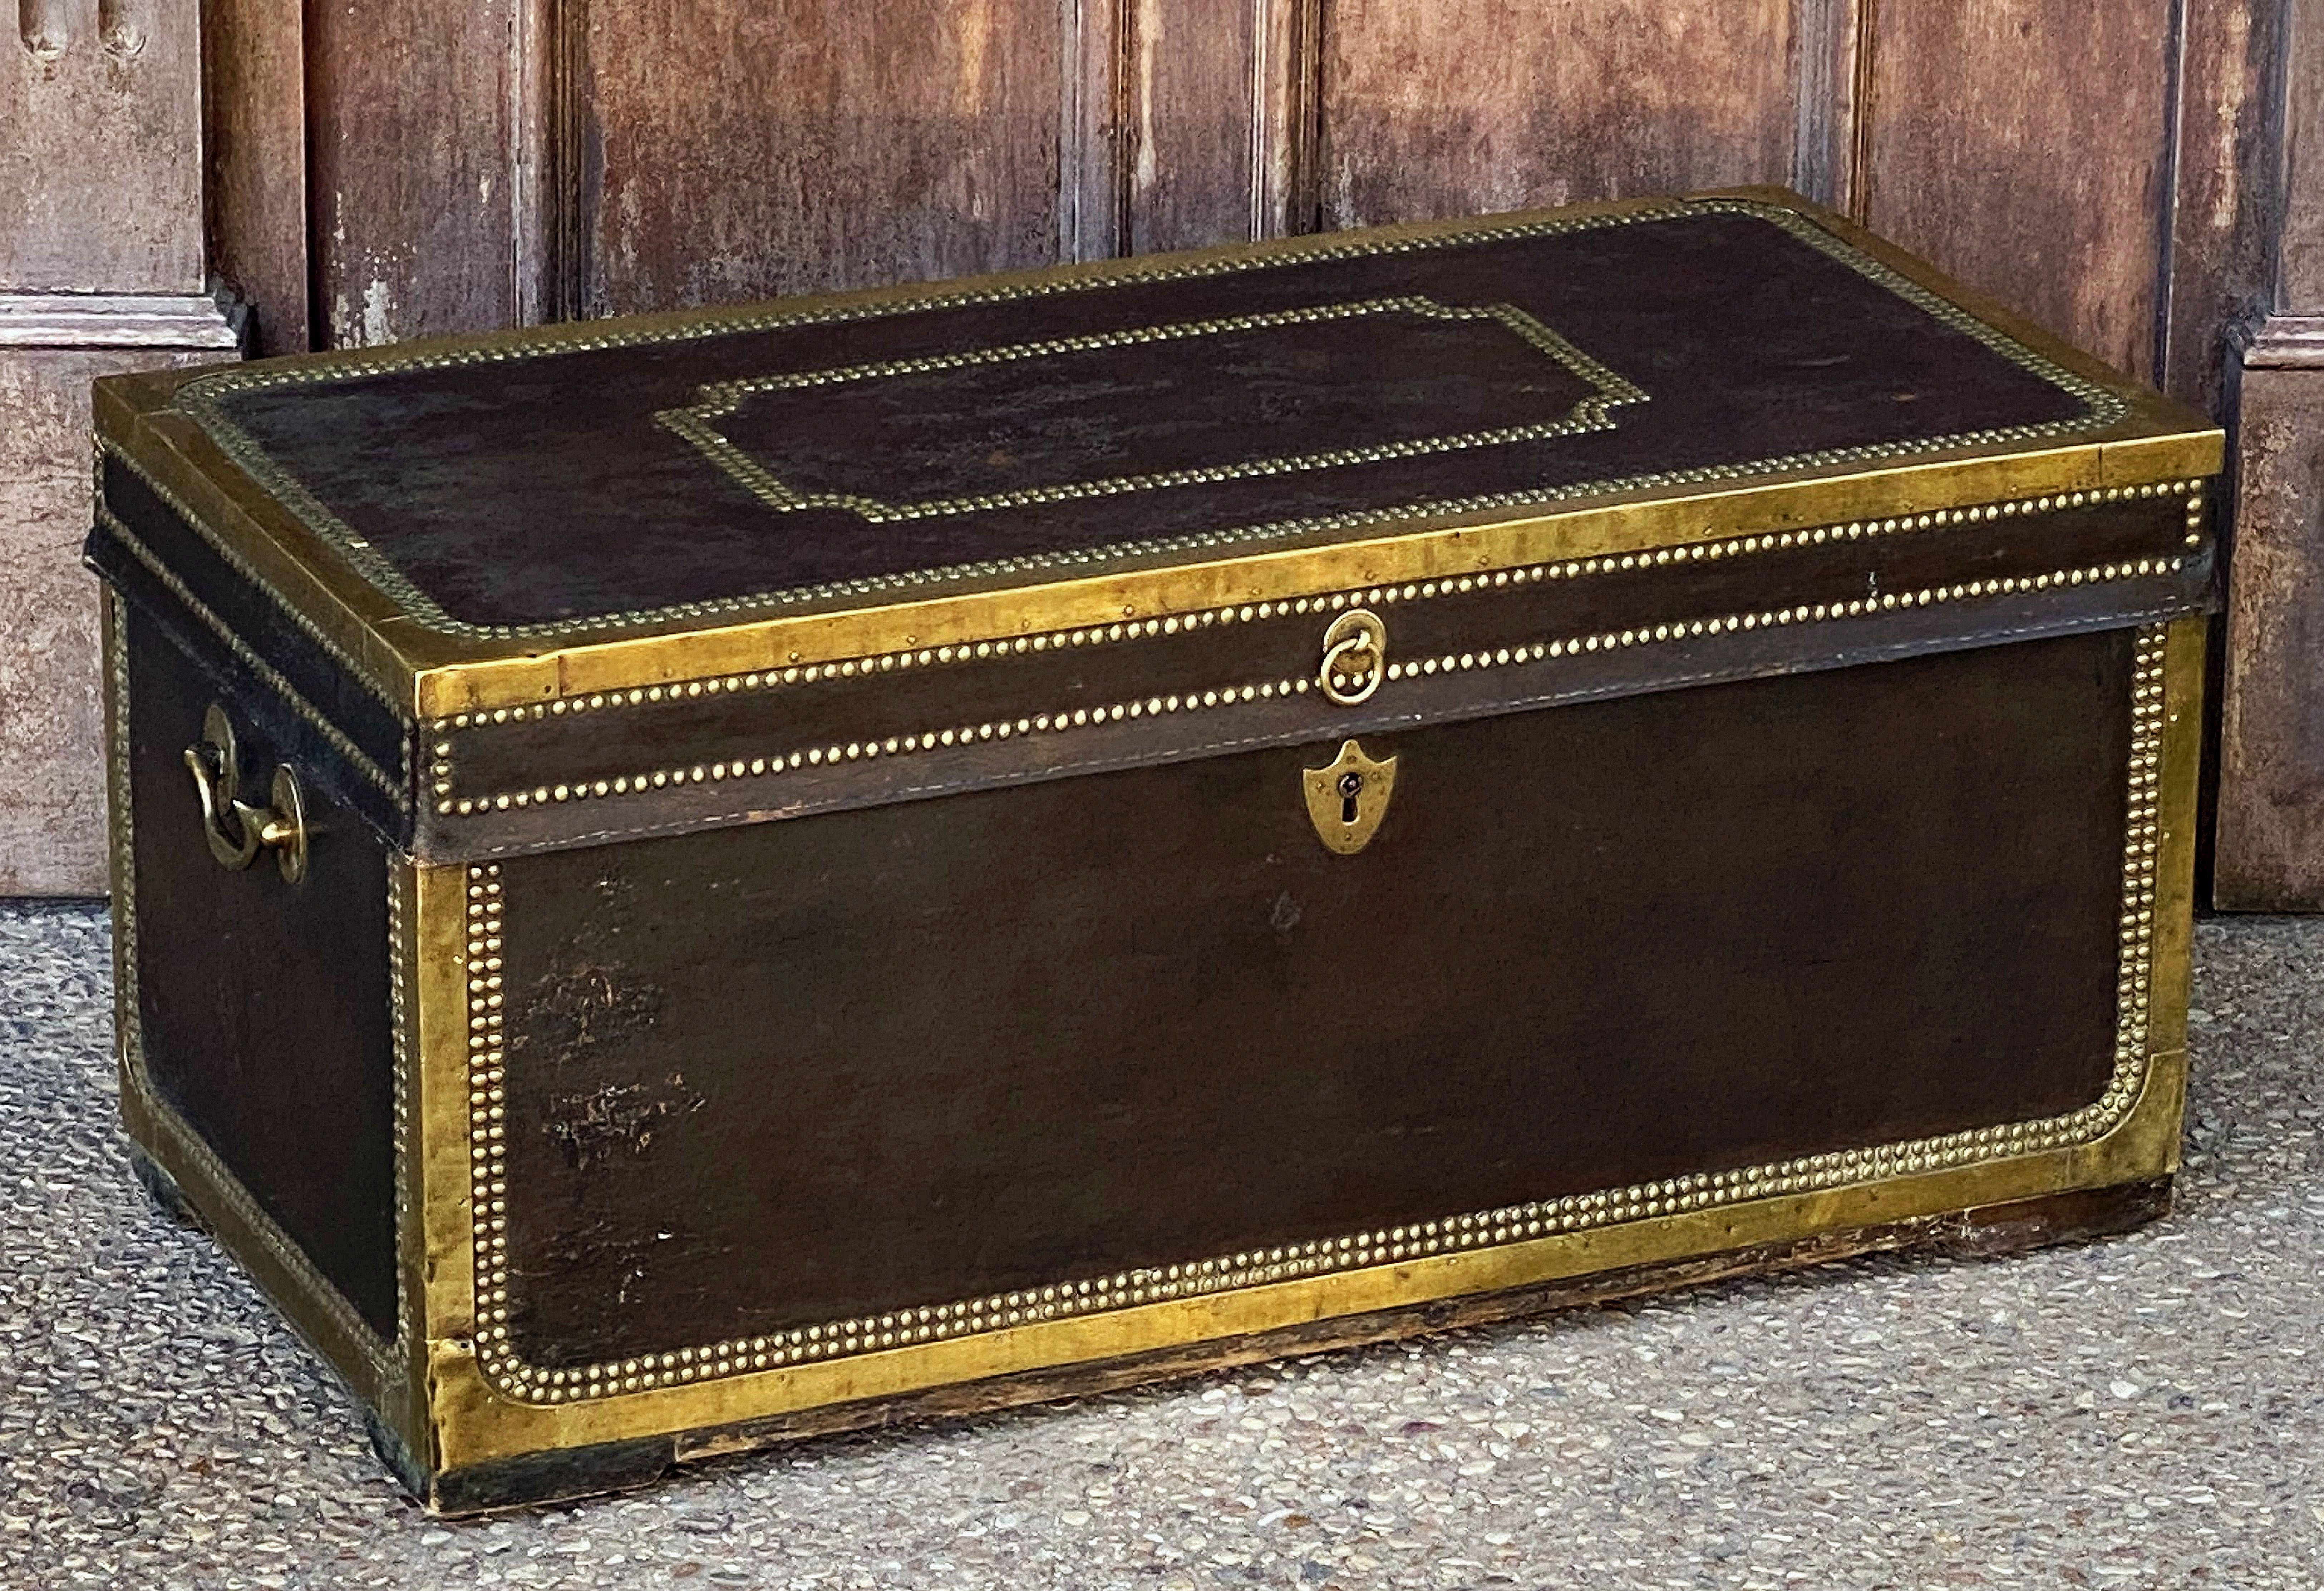 A handsome large-sized British officer's military or naval Campaign camphor trunk or chest of brass-bound and studded leather over camphor wood, circa 1820.
Manufactured by the British East India Company for an officer to carry his kit on